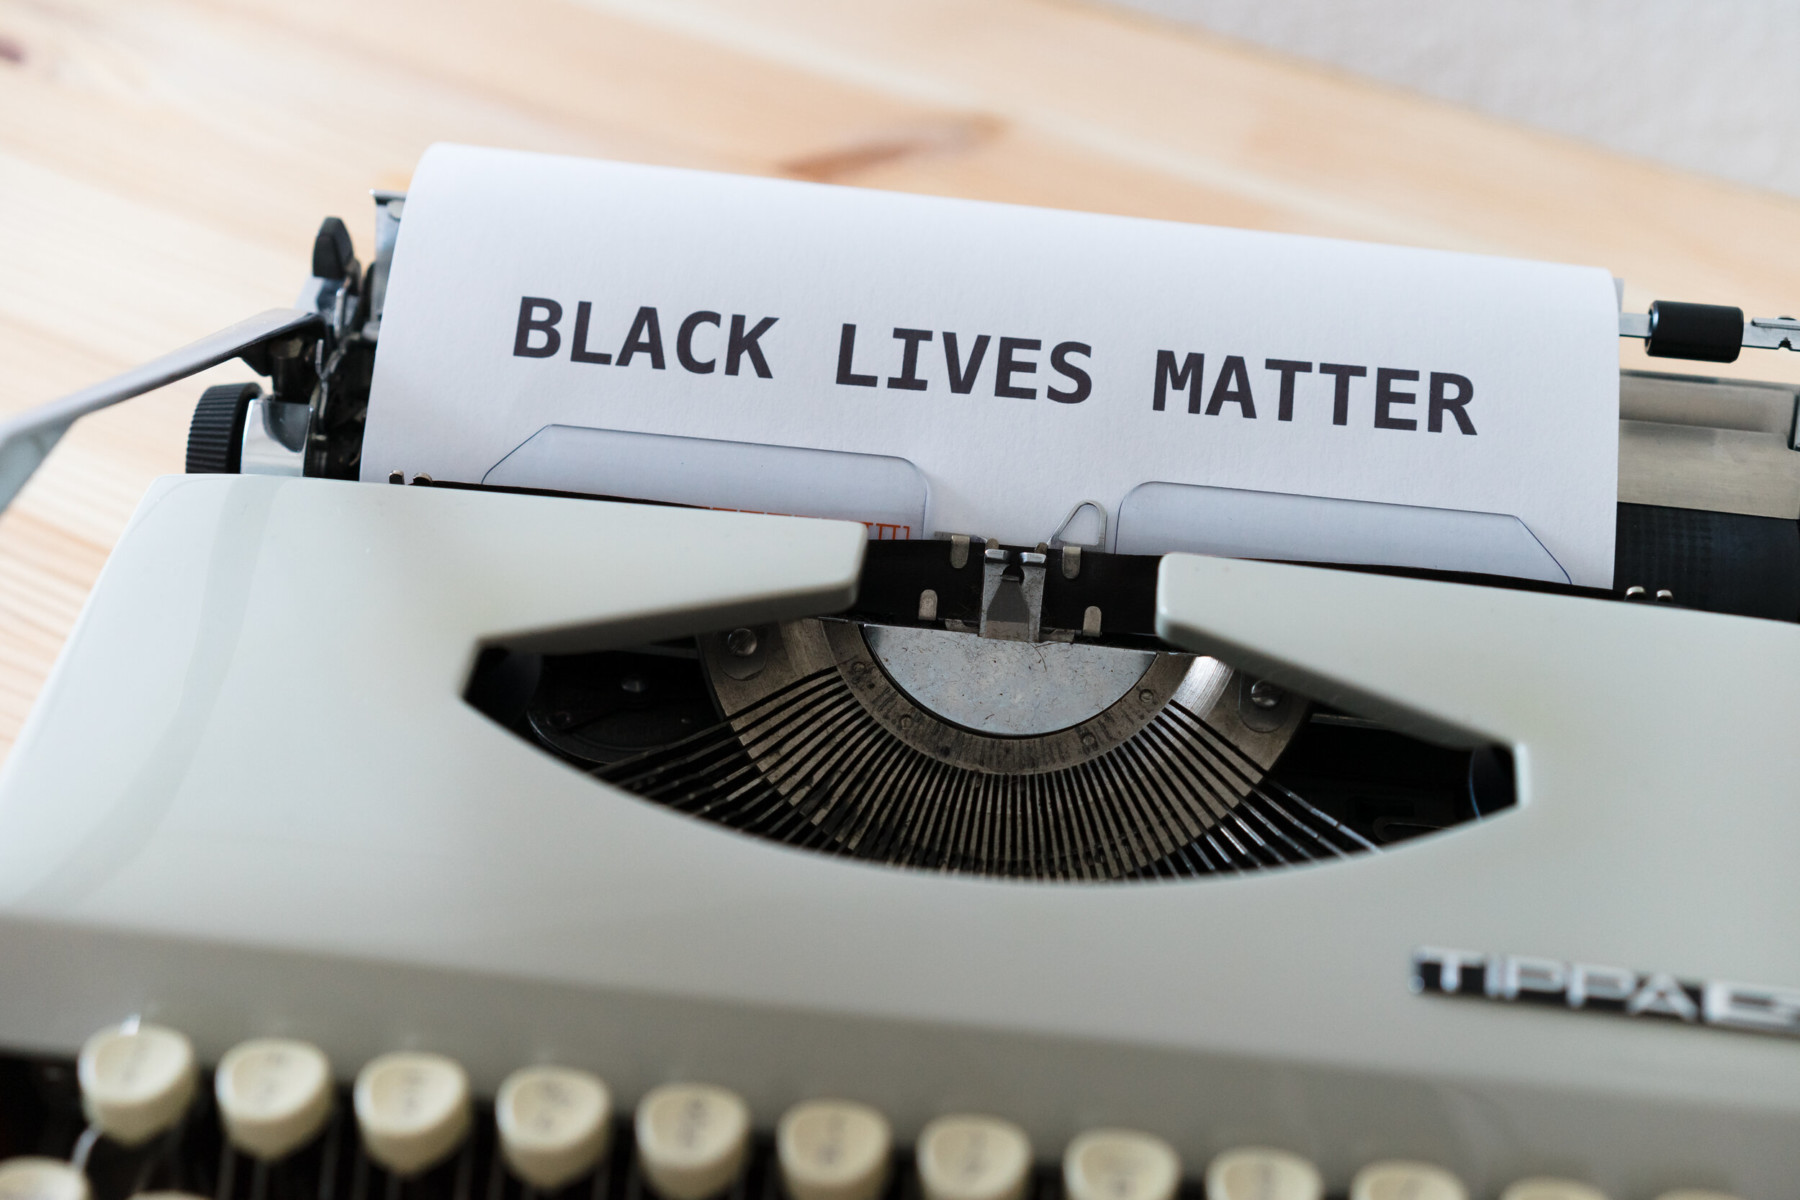 BLM activists need to decide policy aims to effect change